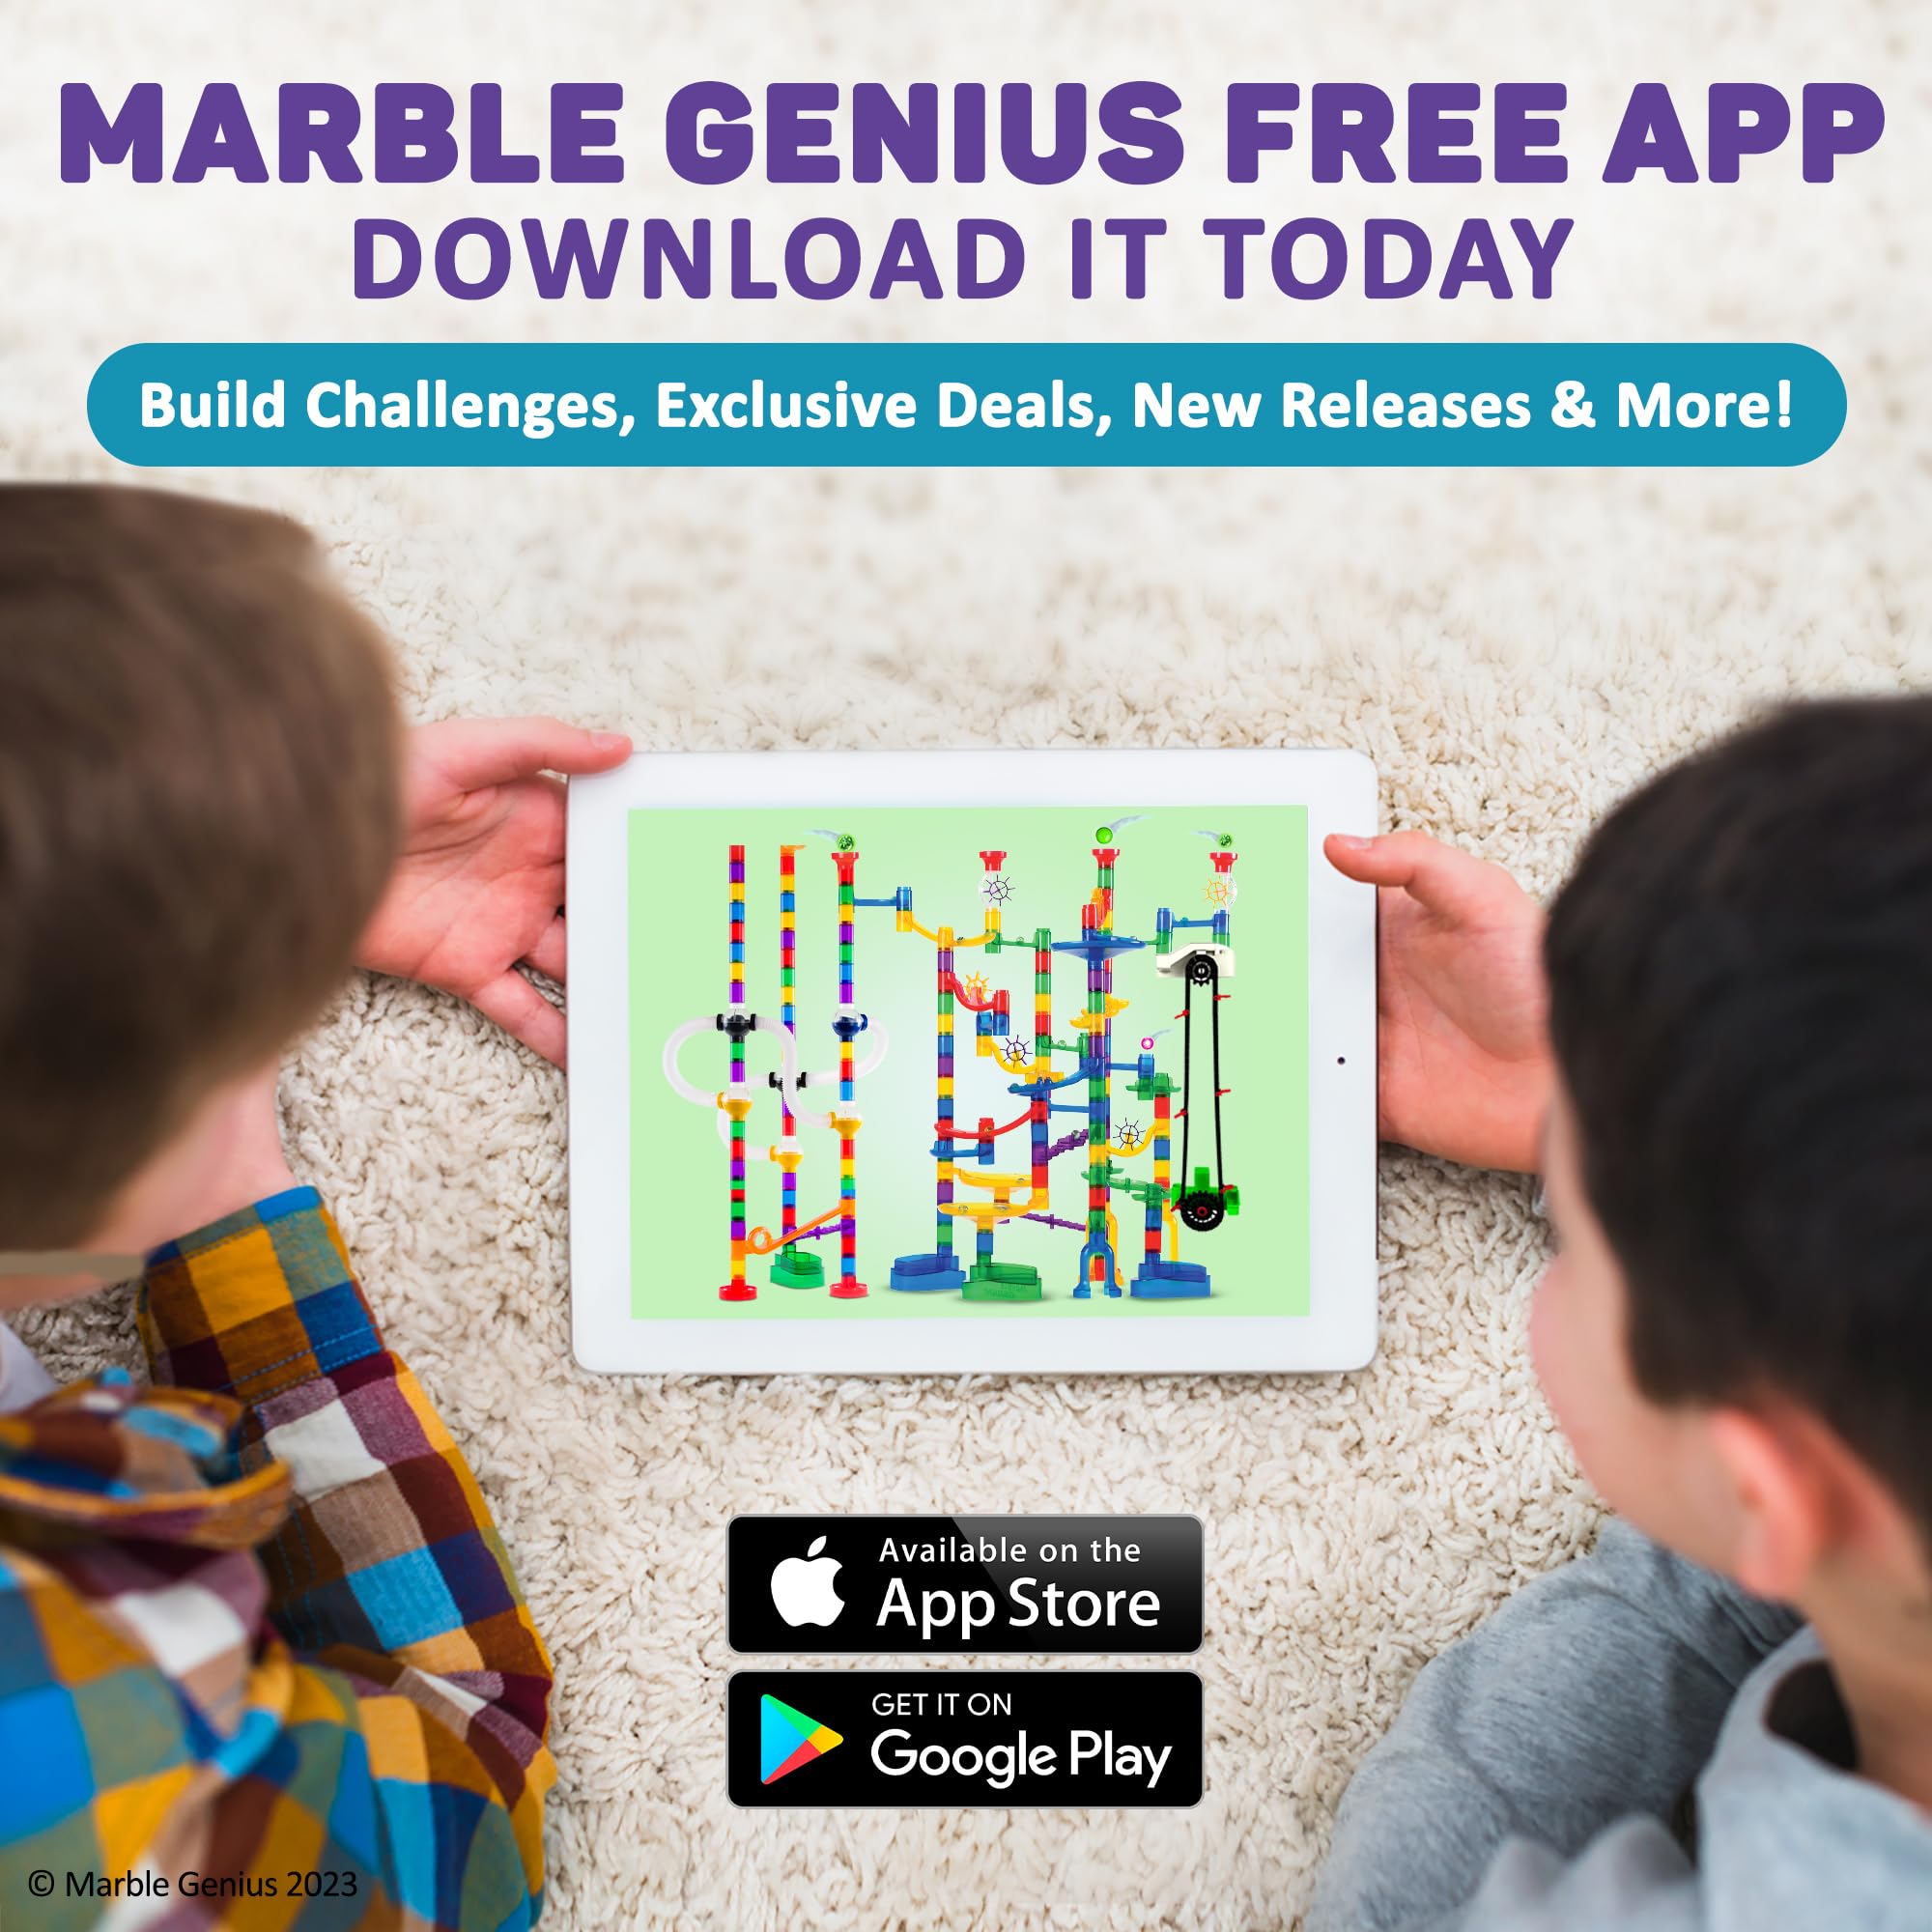 Marble Genius Bundle: Marble Run Space Elevator with Glass Glow Marbles and Automatic Chain Lift, Experience The Thrills of Marble Racing